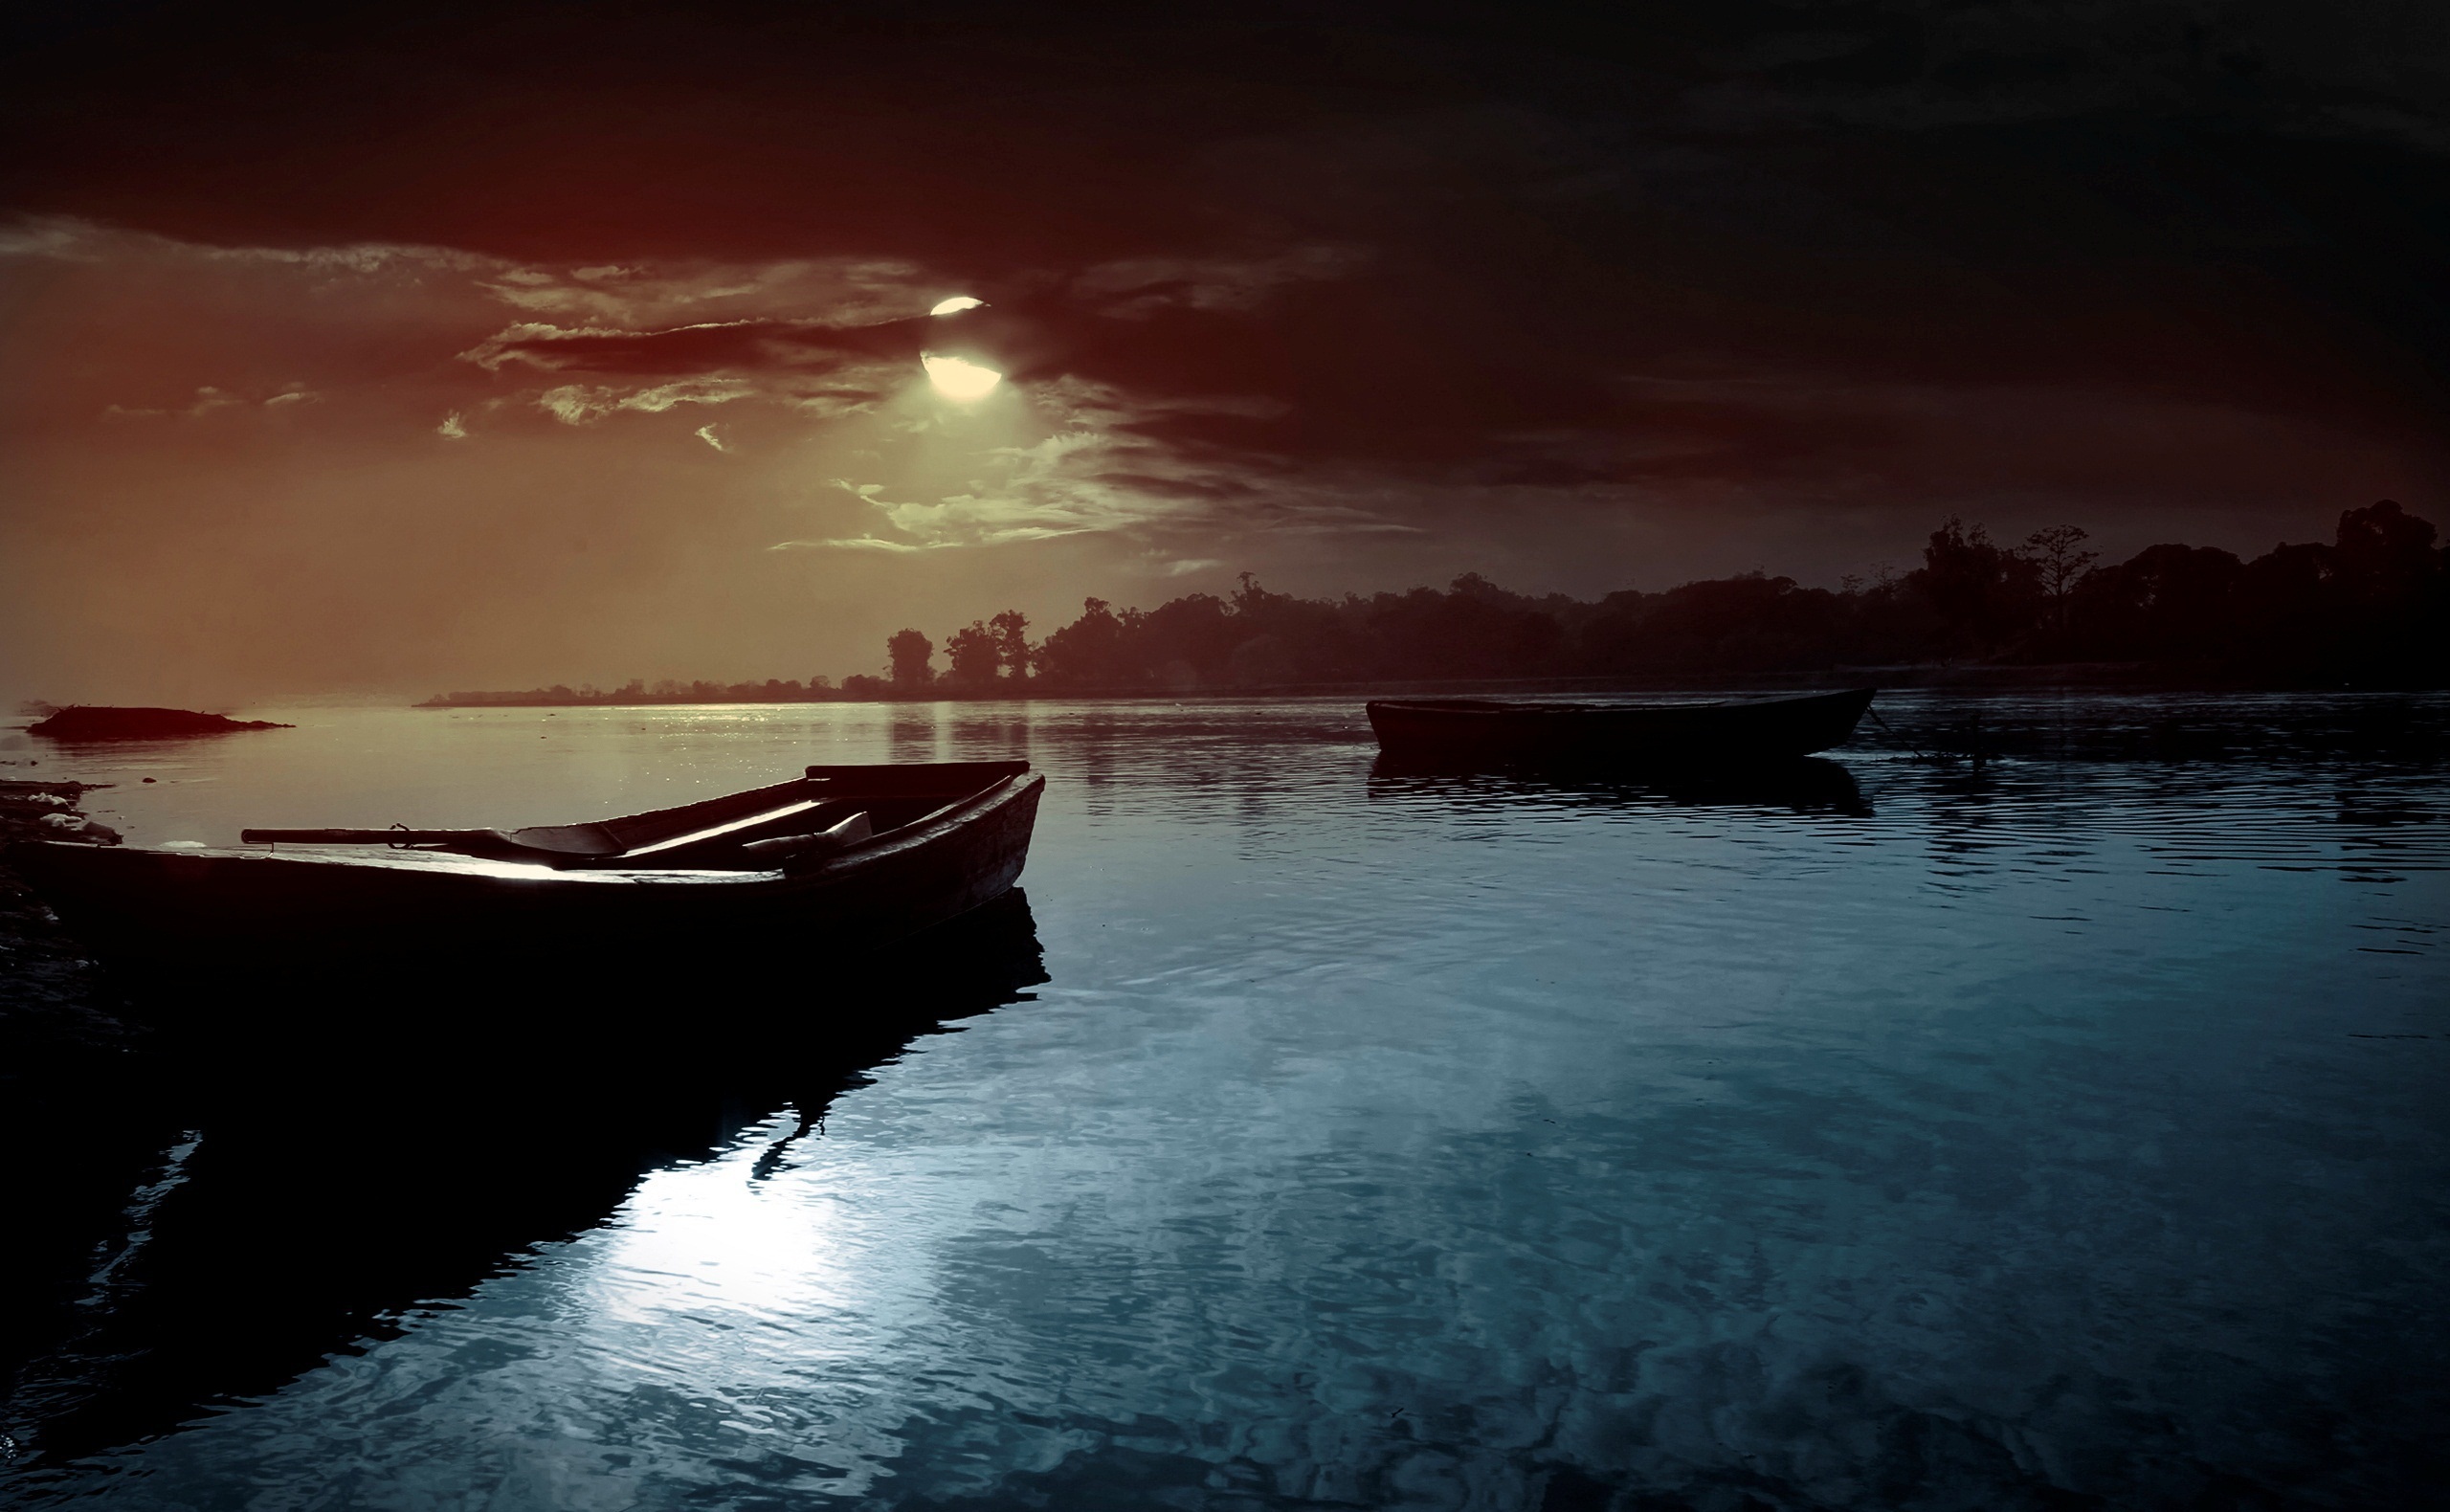 night moon boats on river wallpaper images picture